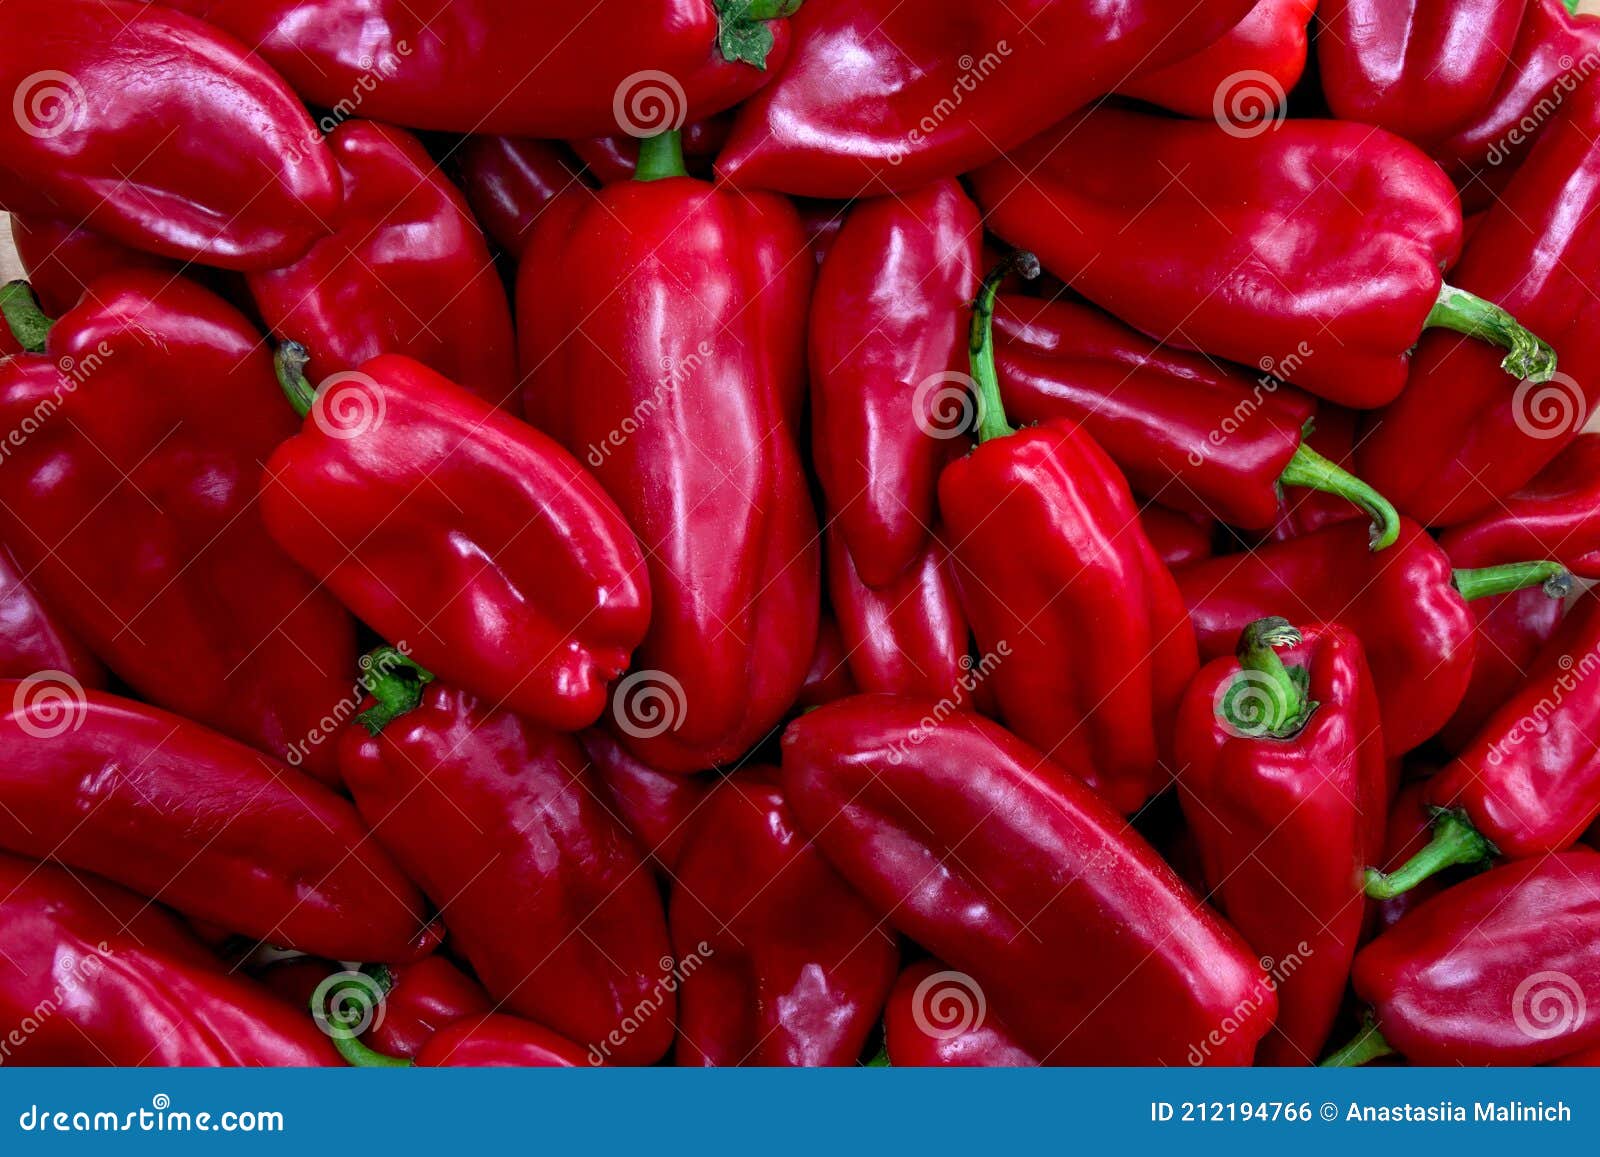 fresh raw red bell peppers  capsicum annuum . texture, background. top view, flat lay